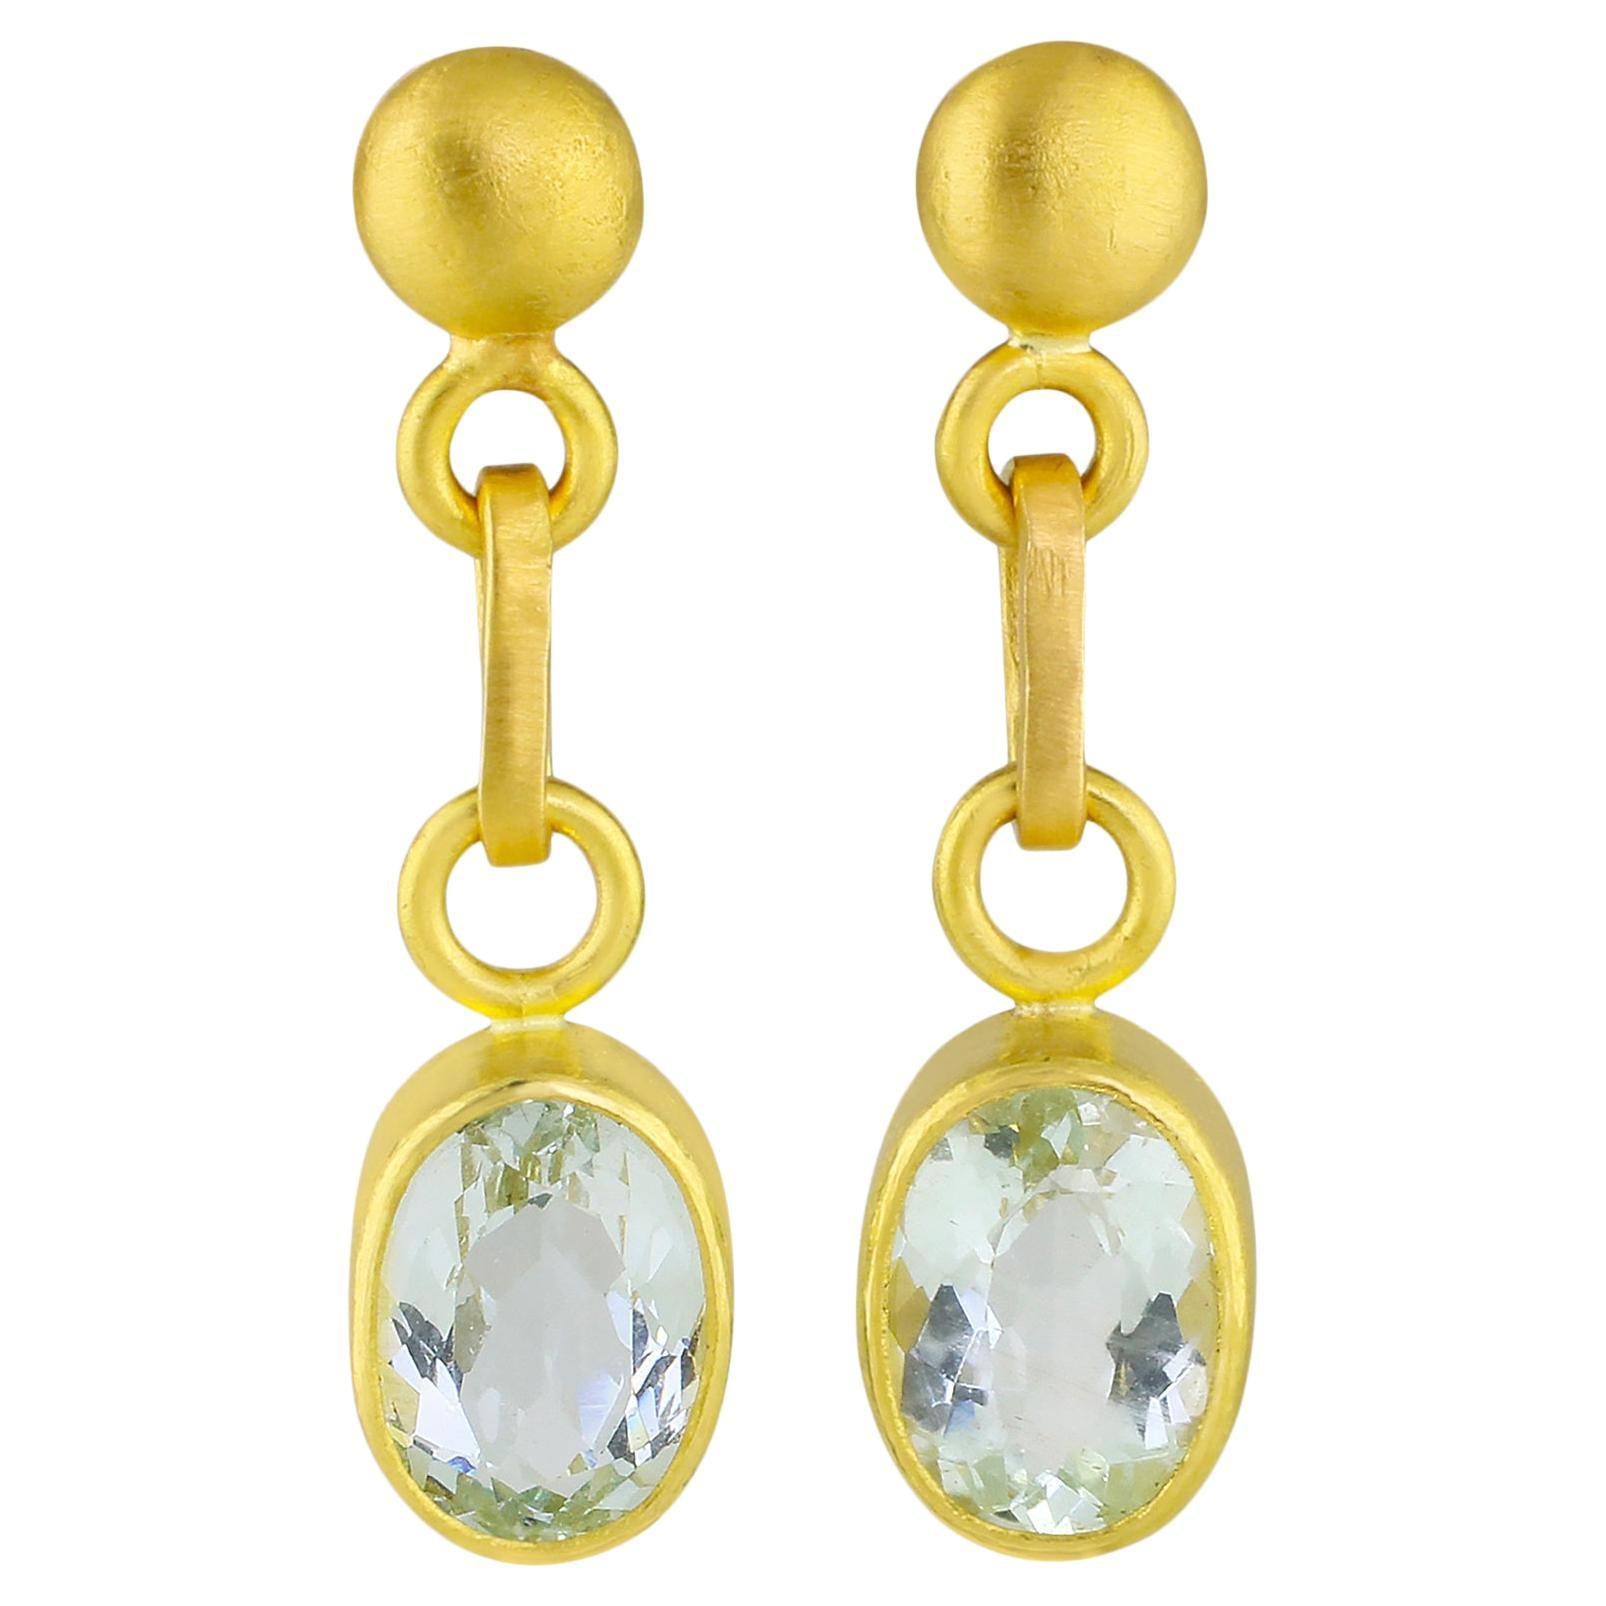 PHILIPPE SPENCER Pure 22K Gold & Oval Aquamarine Dangling Earrings